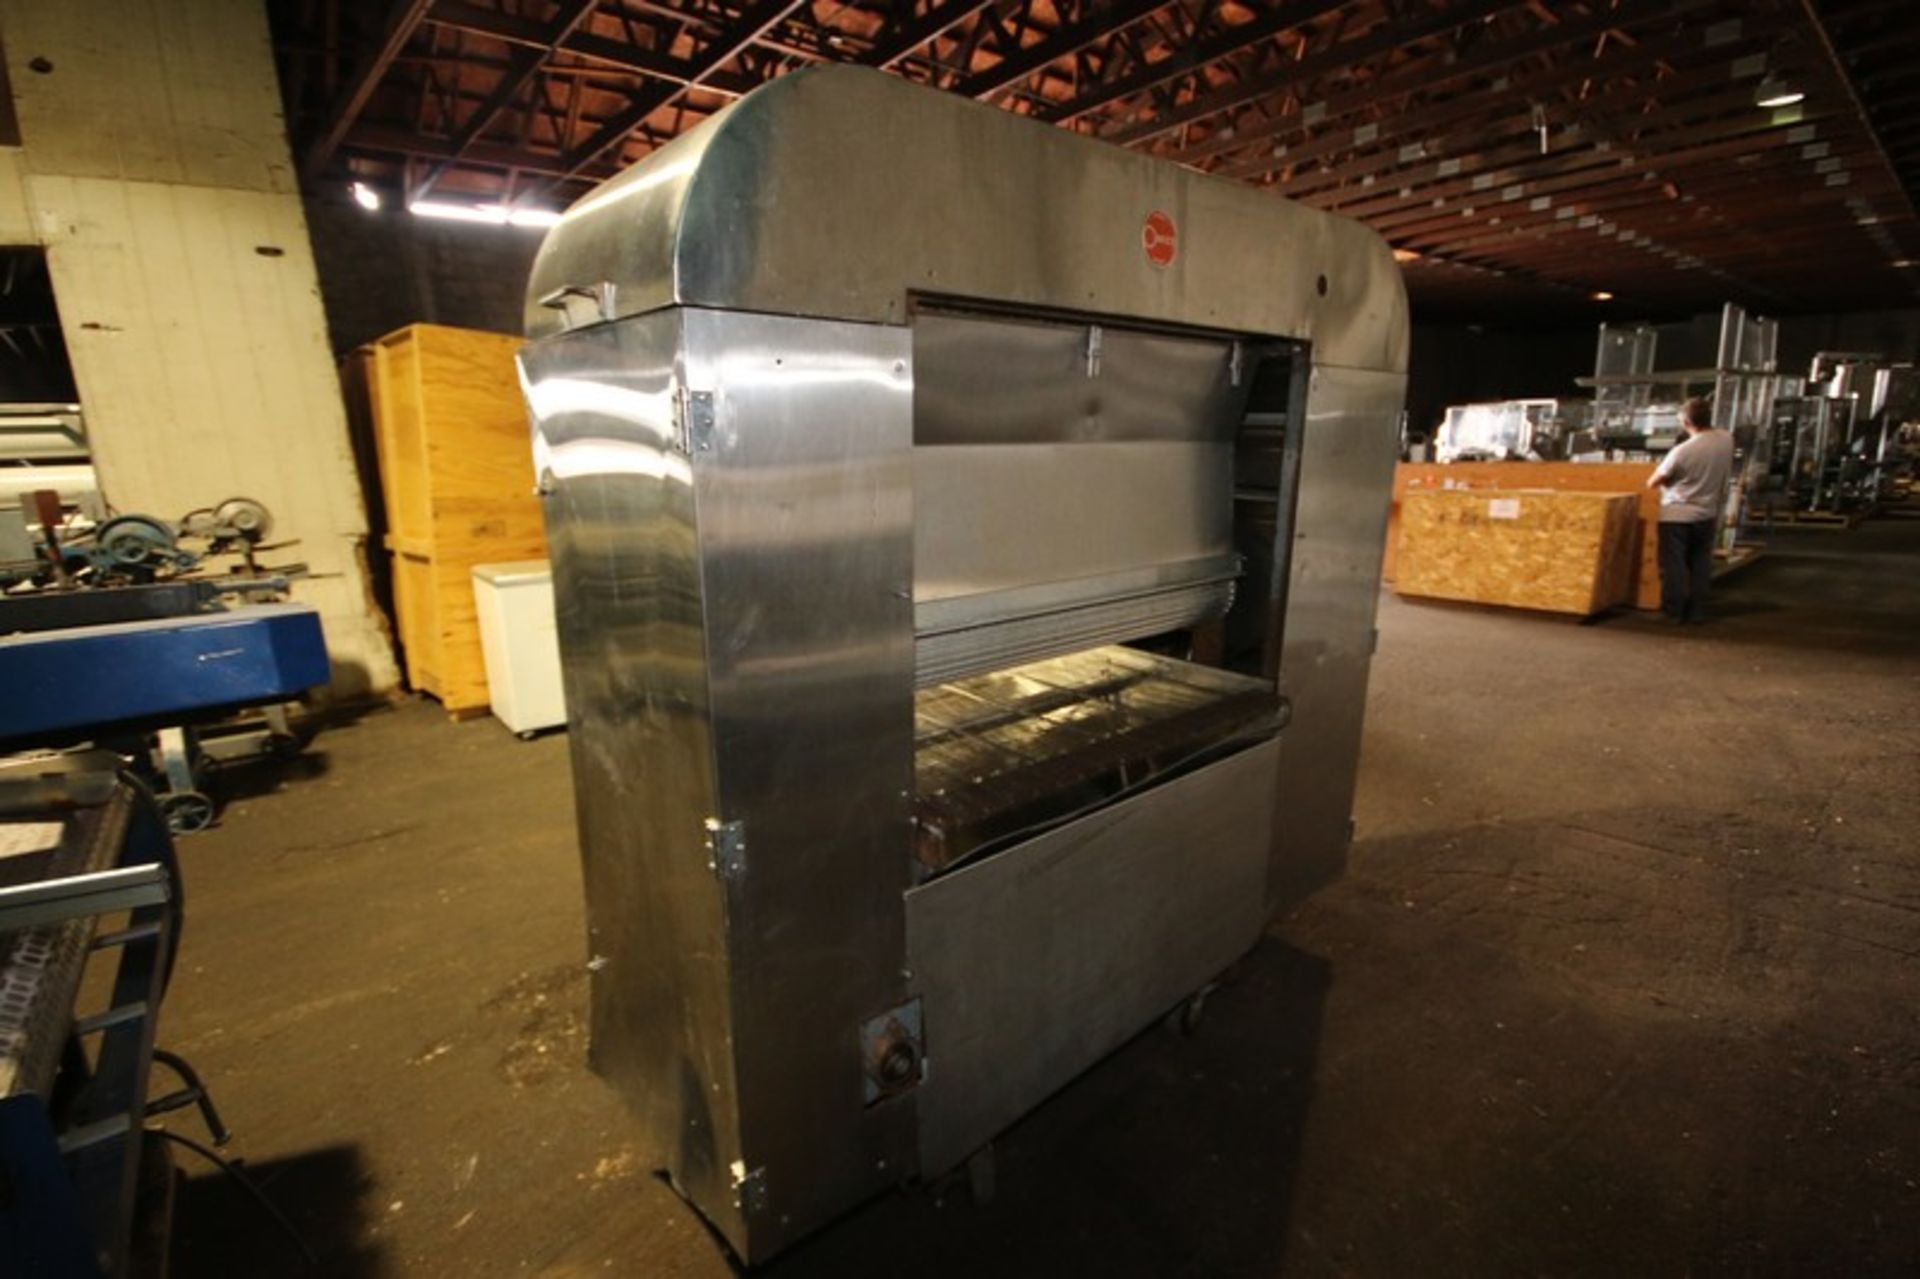 Oates S/S Depositor with 42" W Belt (INV#65769) (Located at the MDG Auction Showroom in - Image 5 of 7